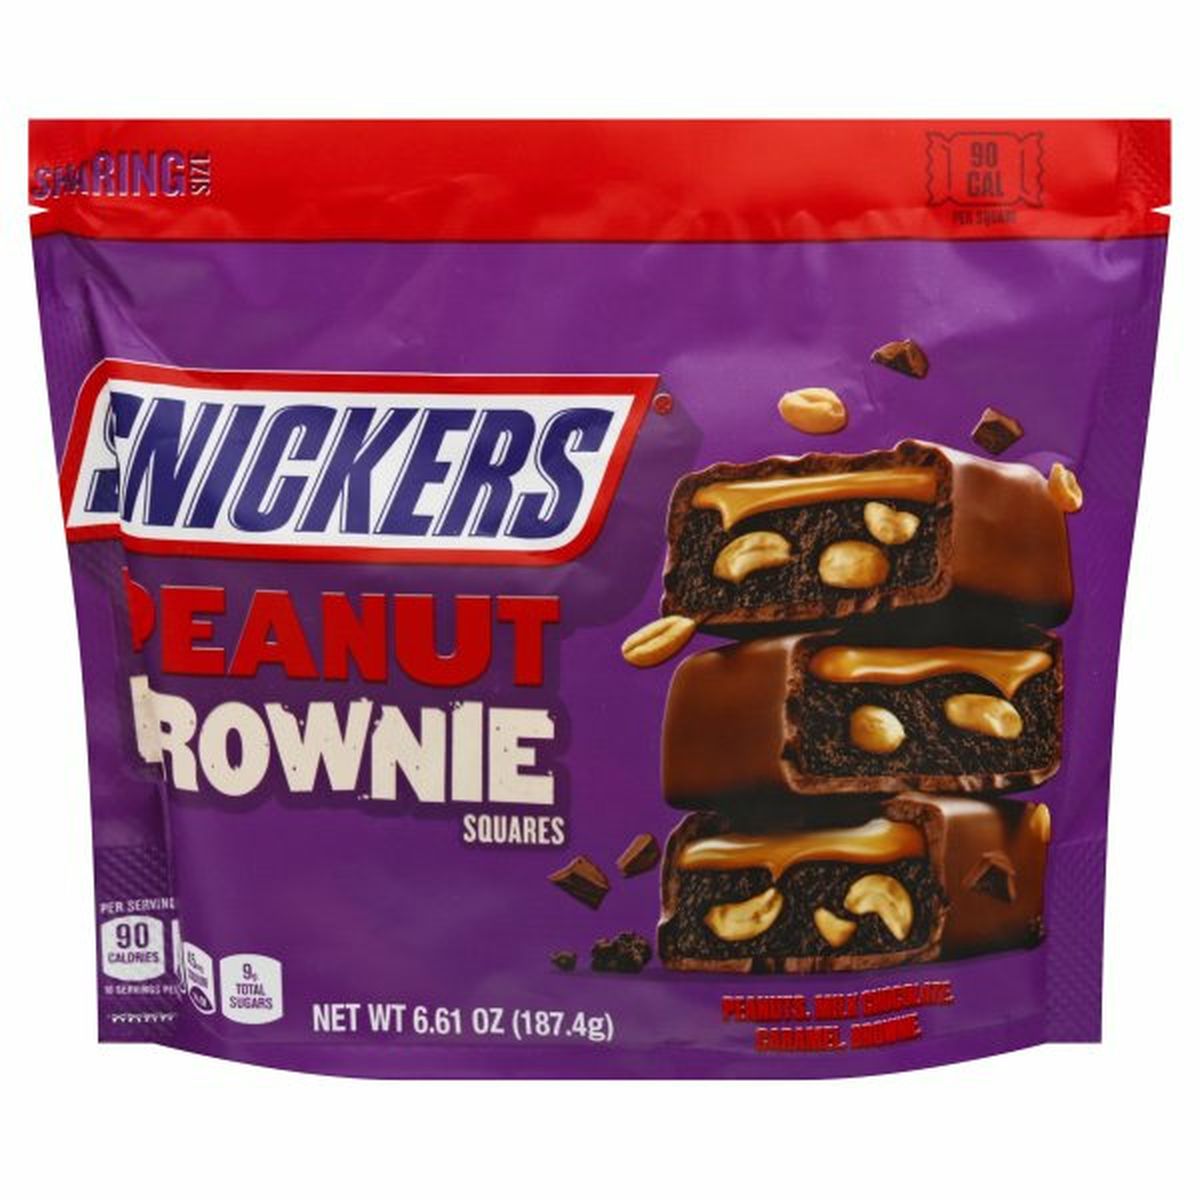 Calories in Snickers Squares, Peanut Brownie, Sharing Size